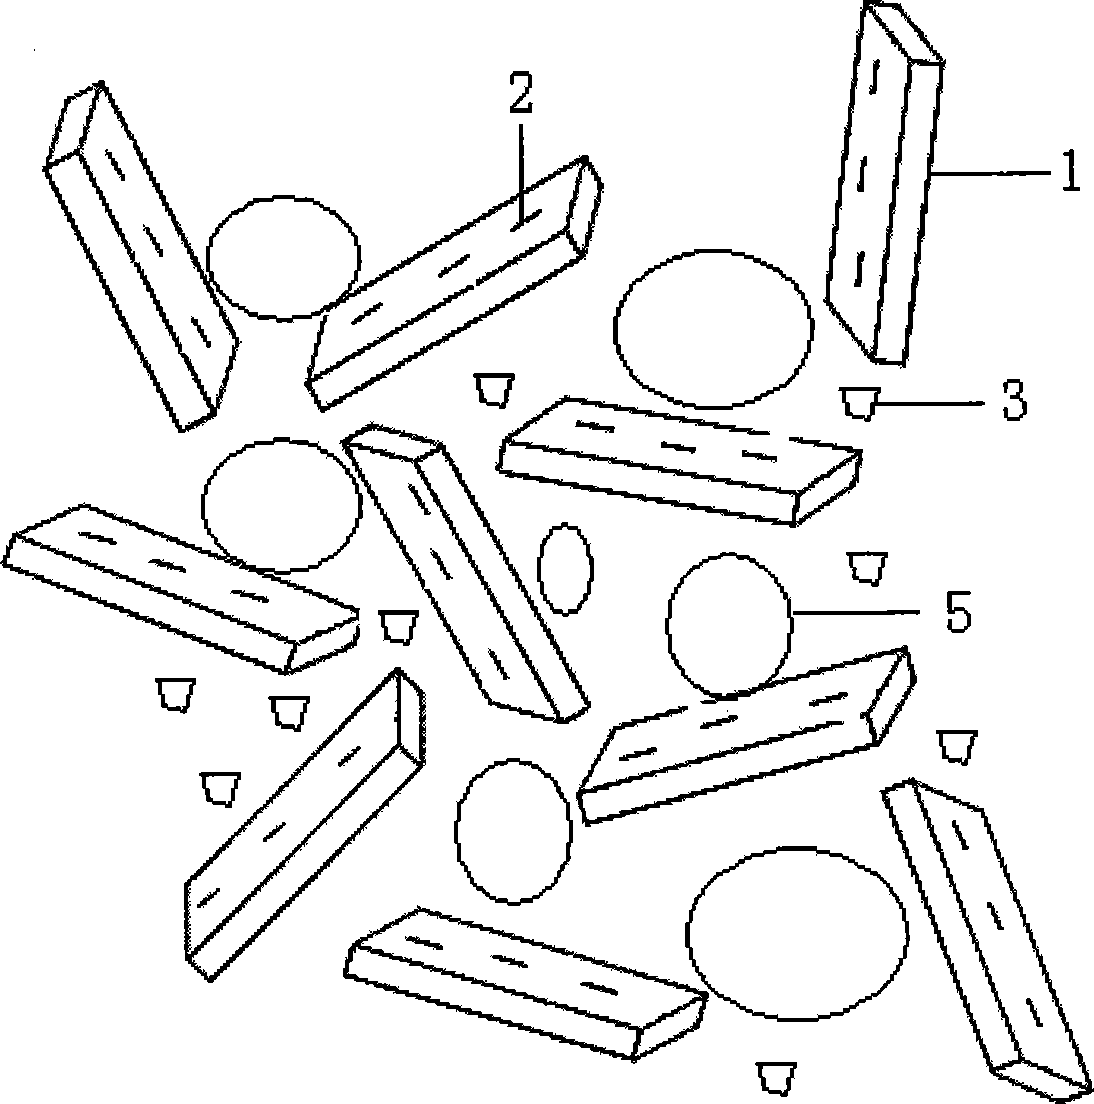 Method for purifying montmorillonite from bentonite ore by twice dispersion method